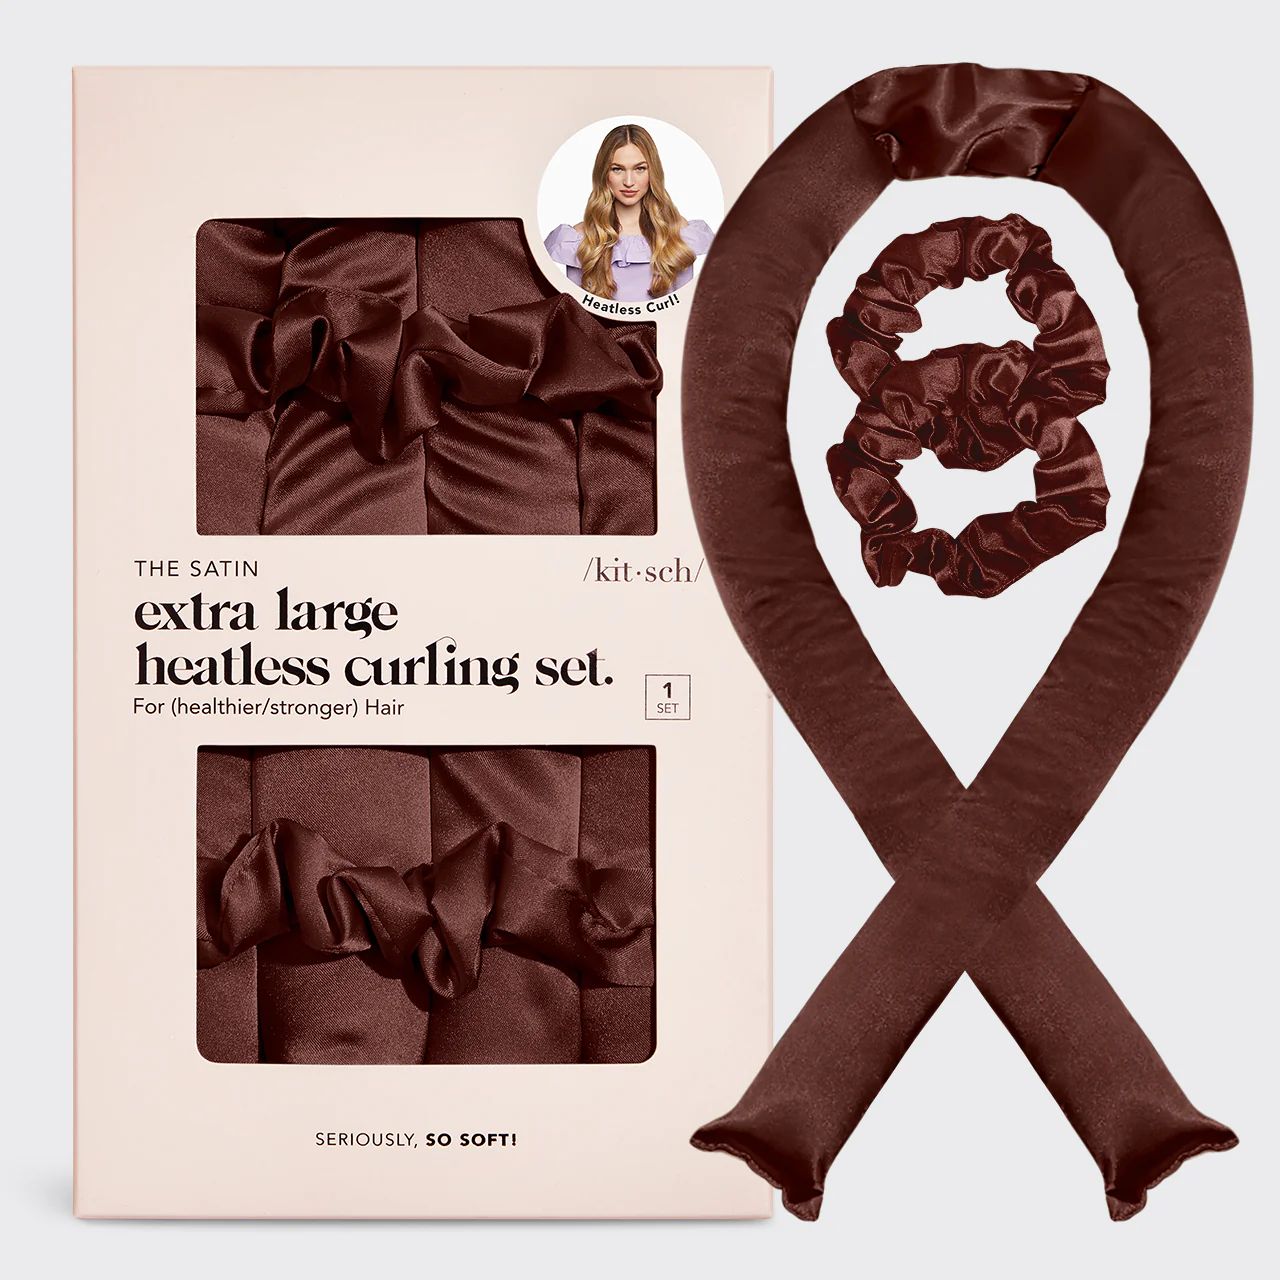 Elevate Your Style: XL Satin Heatless Curling Set in Chocolate | Kitsch